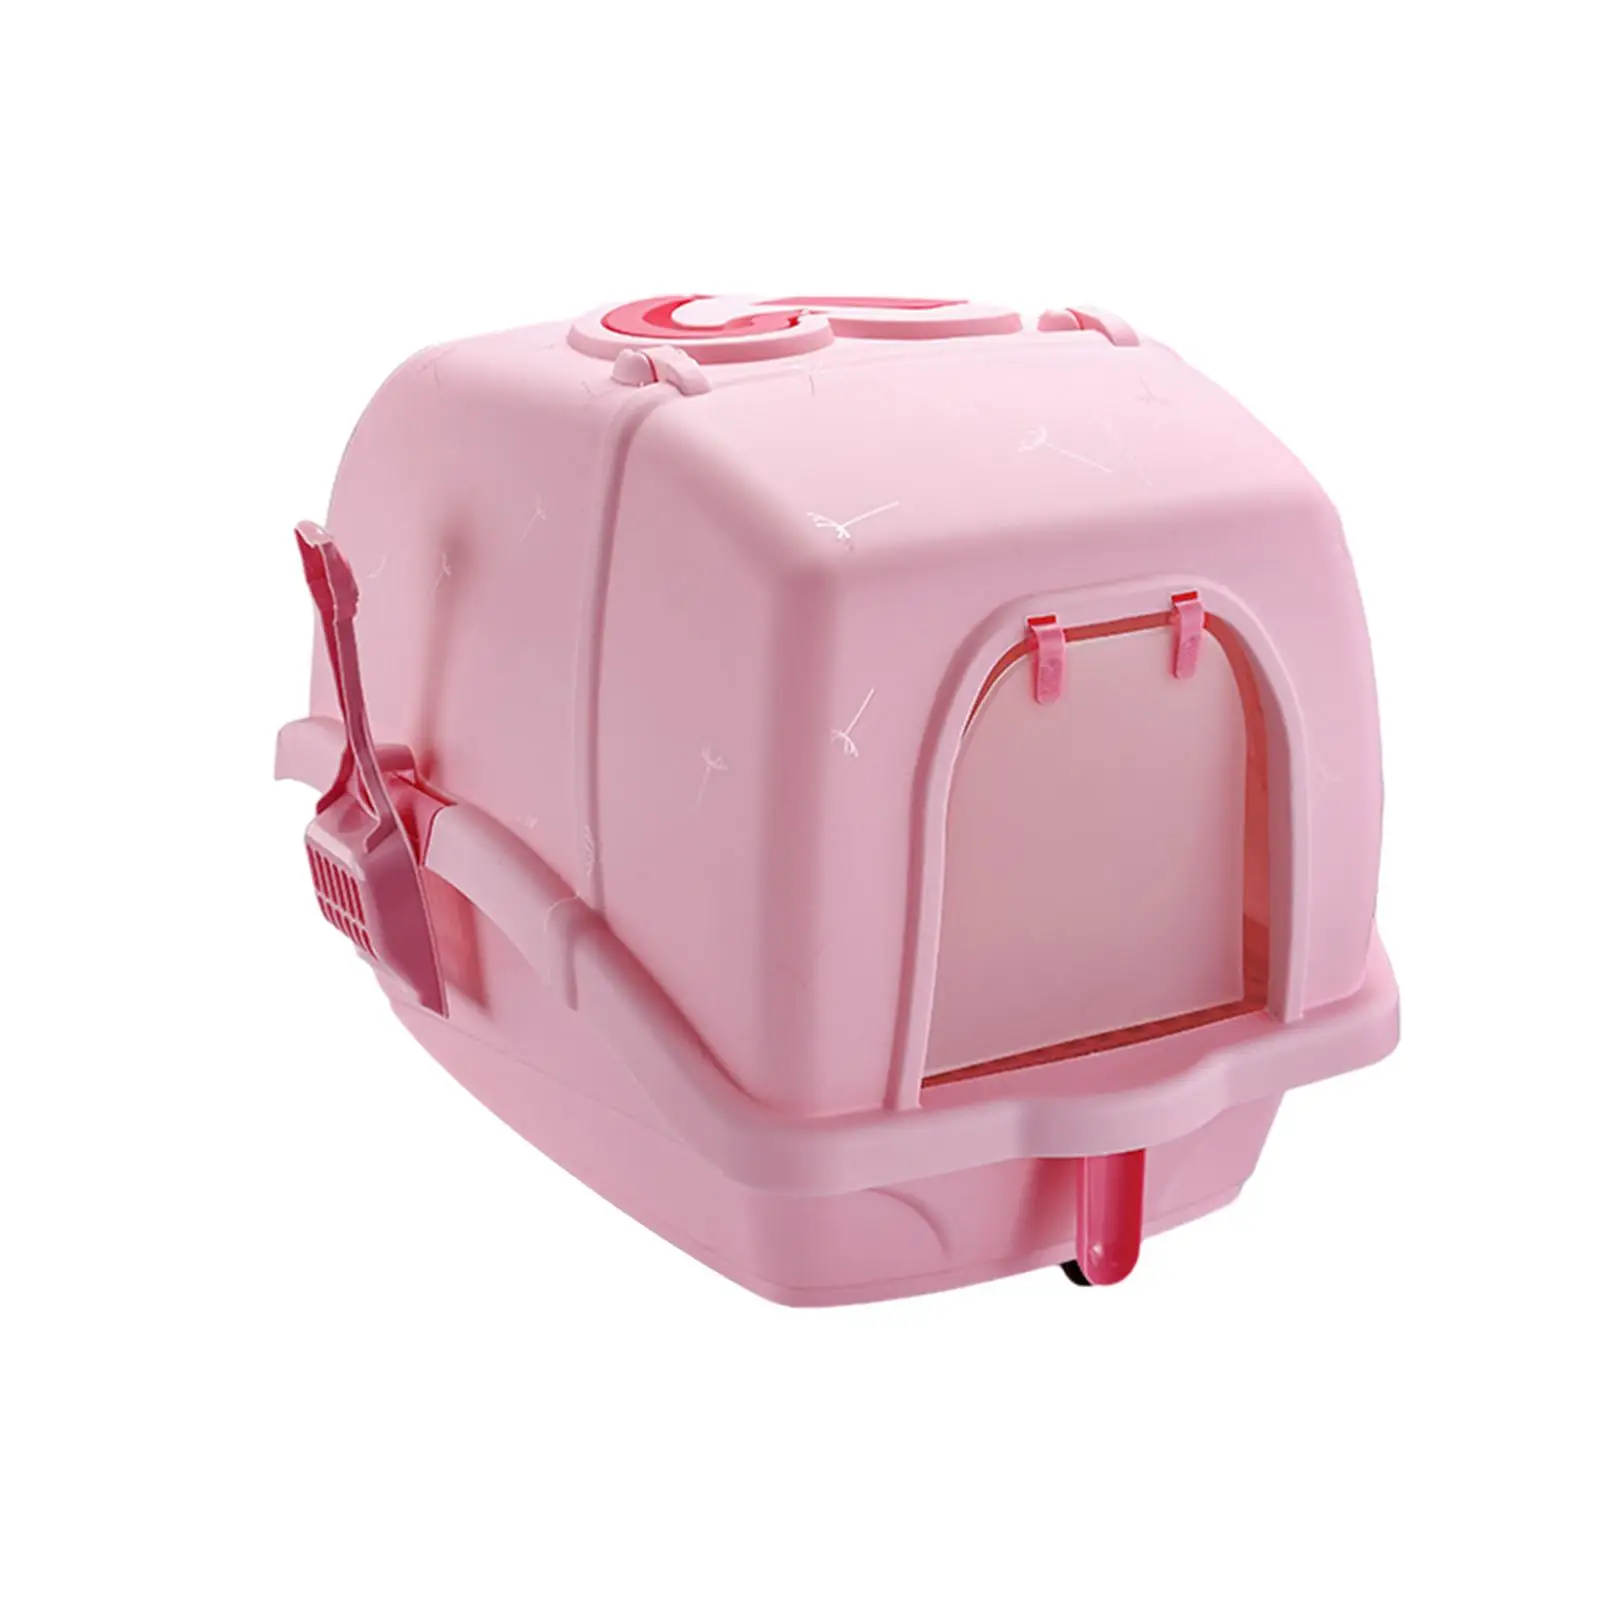 Fully Enclosed Cat Litter Box Provides Privacy with Handle Covered Cat Toilet